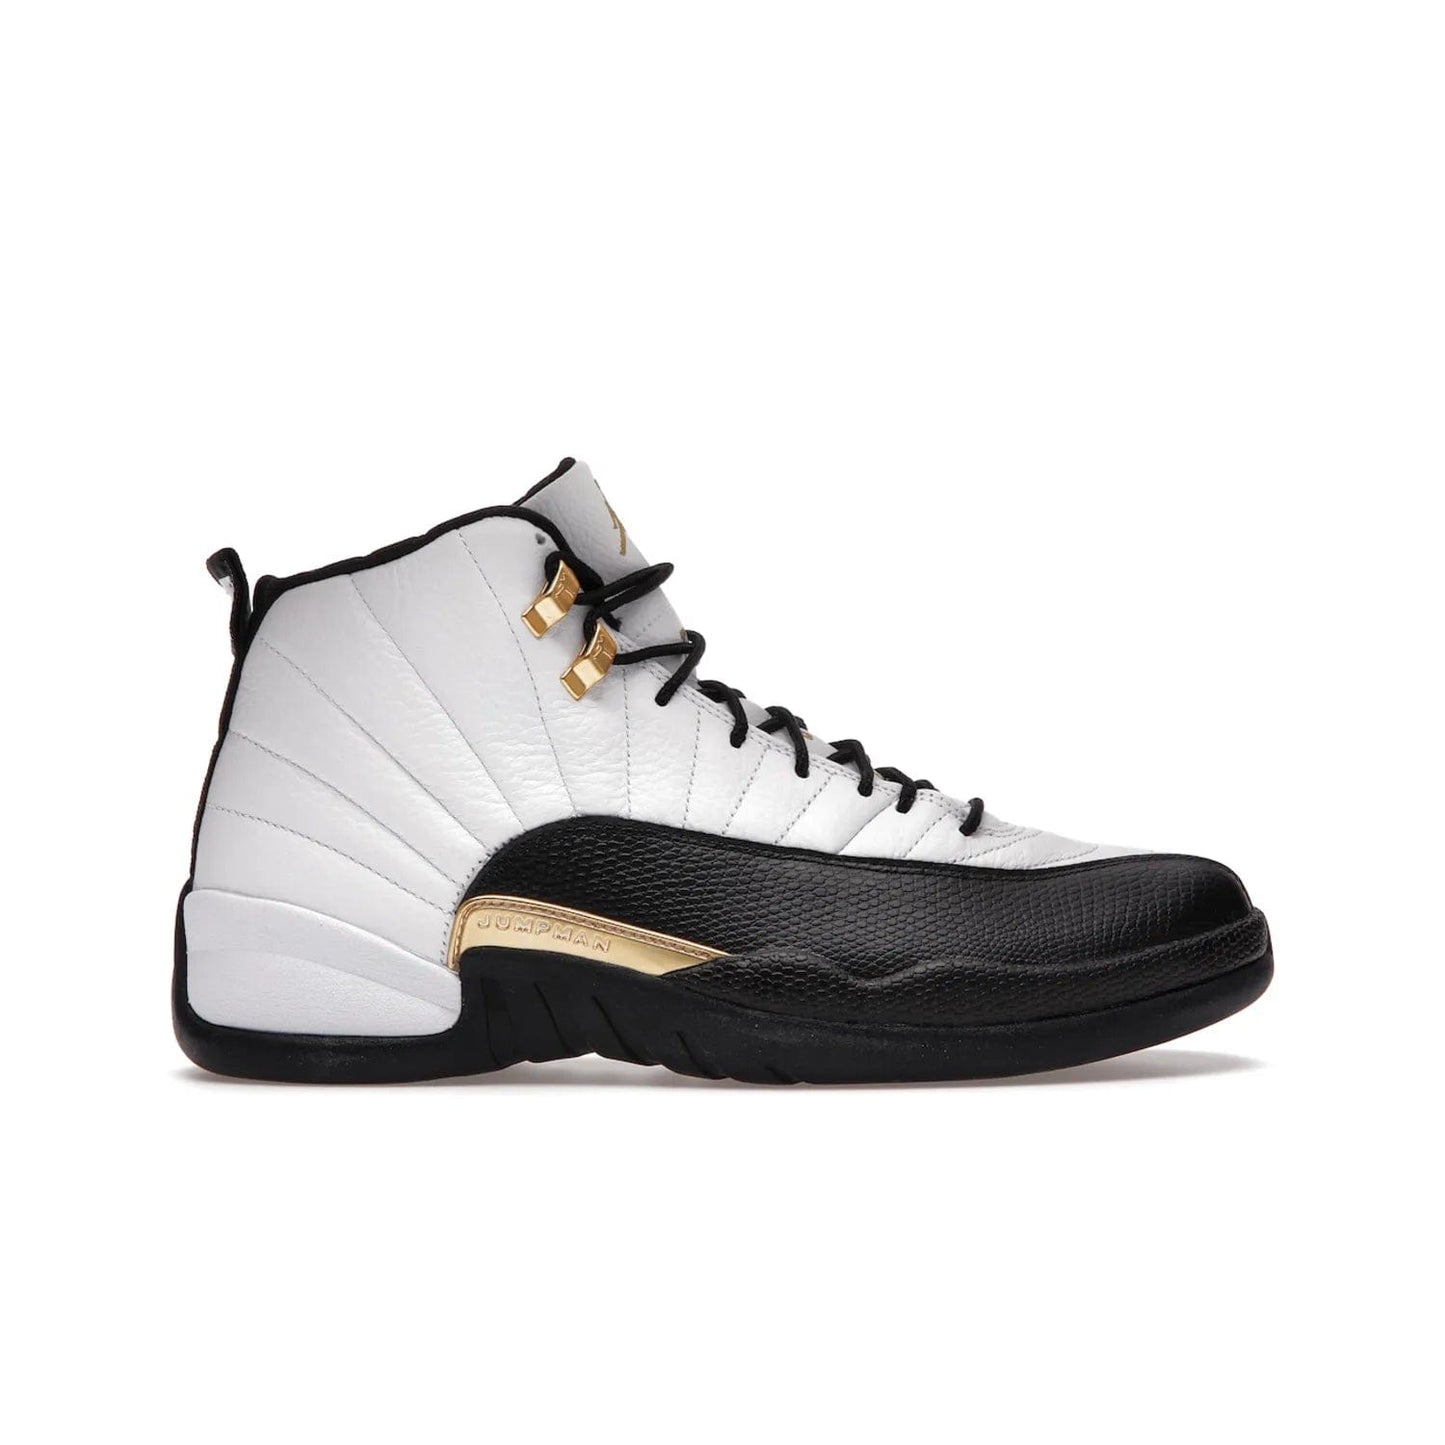 Jordan 12 Retro Royalty Taxi - Image 1 - Only at www.BallersClubKickz.com - Make a statement with the Air Jordan 12 Retro Royalty Taxi. Woven heel tag, gold plaquet, white tumbled leather upper plus a black toe wrap, make this modern take on the classic a must-have. Available in November 2021.